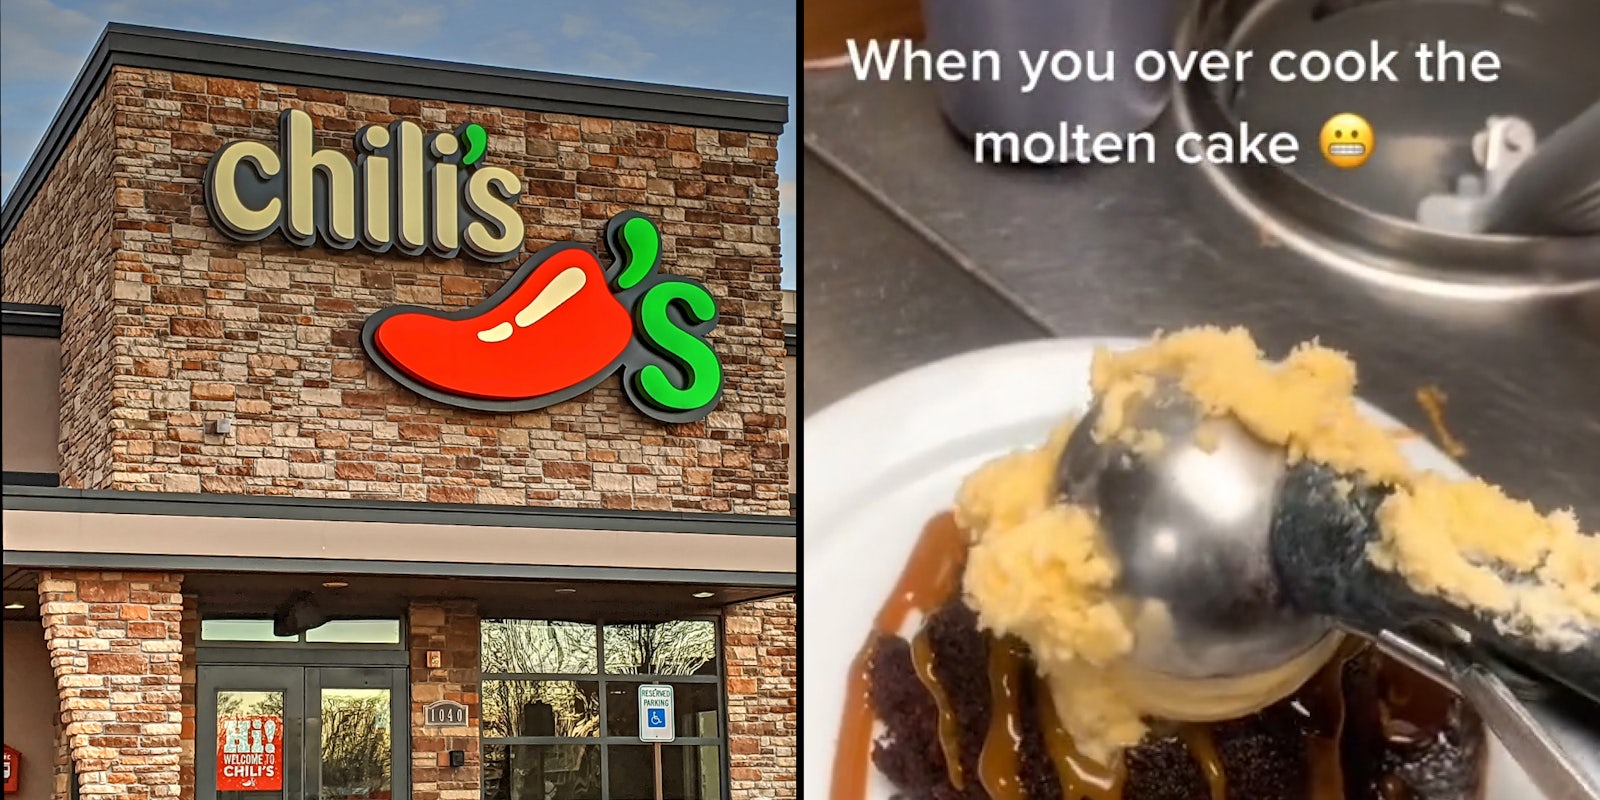 Chili's restaurant with sign (l) Chili's molten cake with ice cream scoop caption 'When you over cook the molten cake' (r)